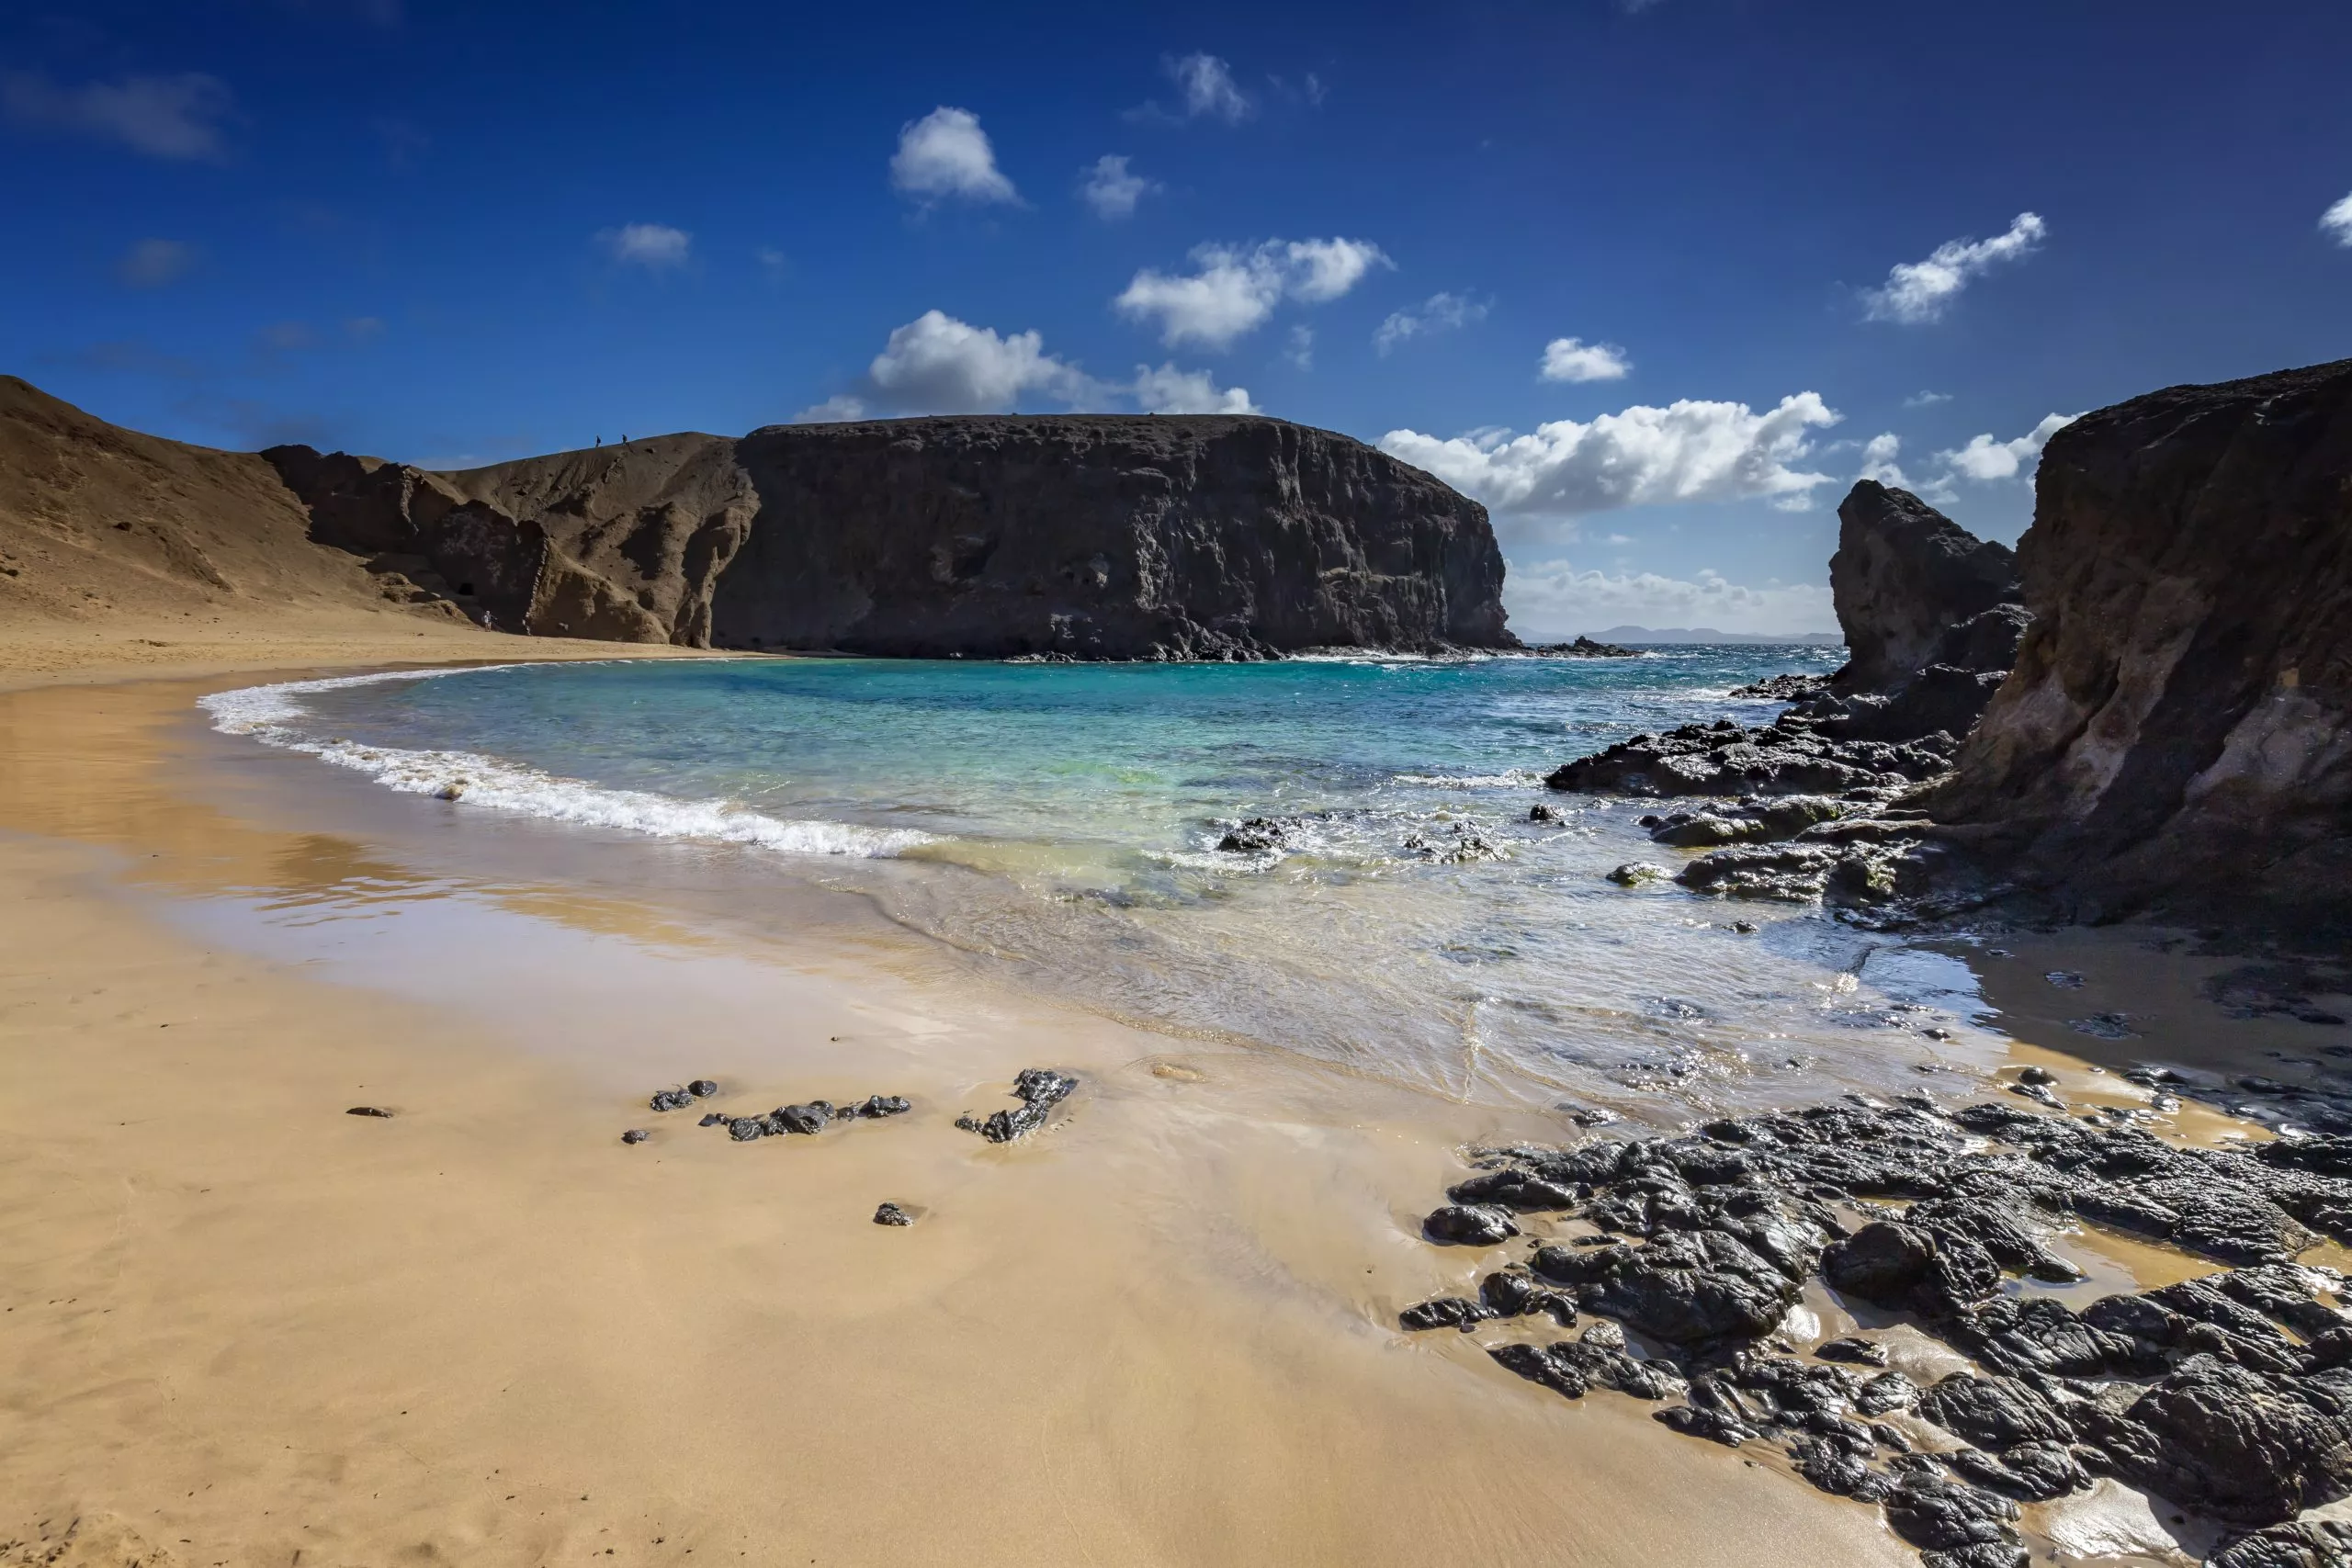 Lanzarote. Volcanic island. Papagayo. Spaces and ocean views. Spanish islands. Landscapes of the Canary Islands. Travel photography.
Nature background.